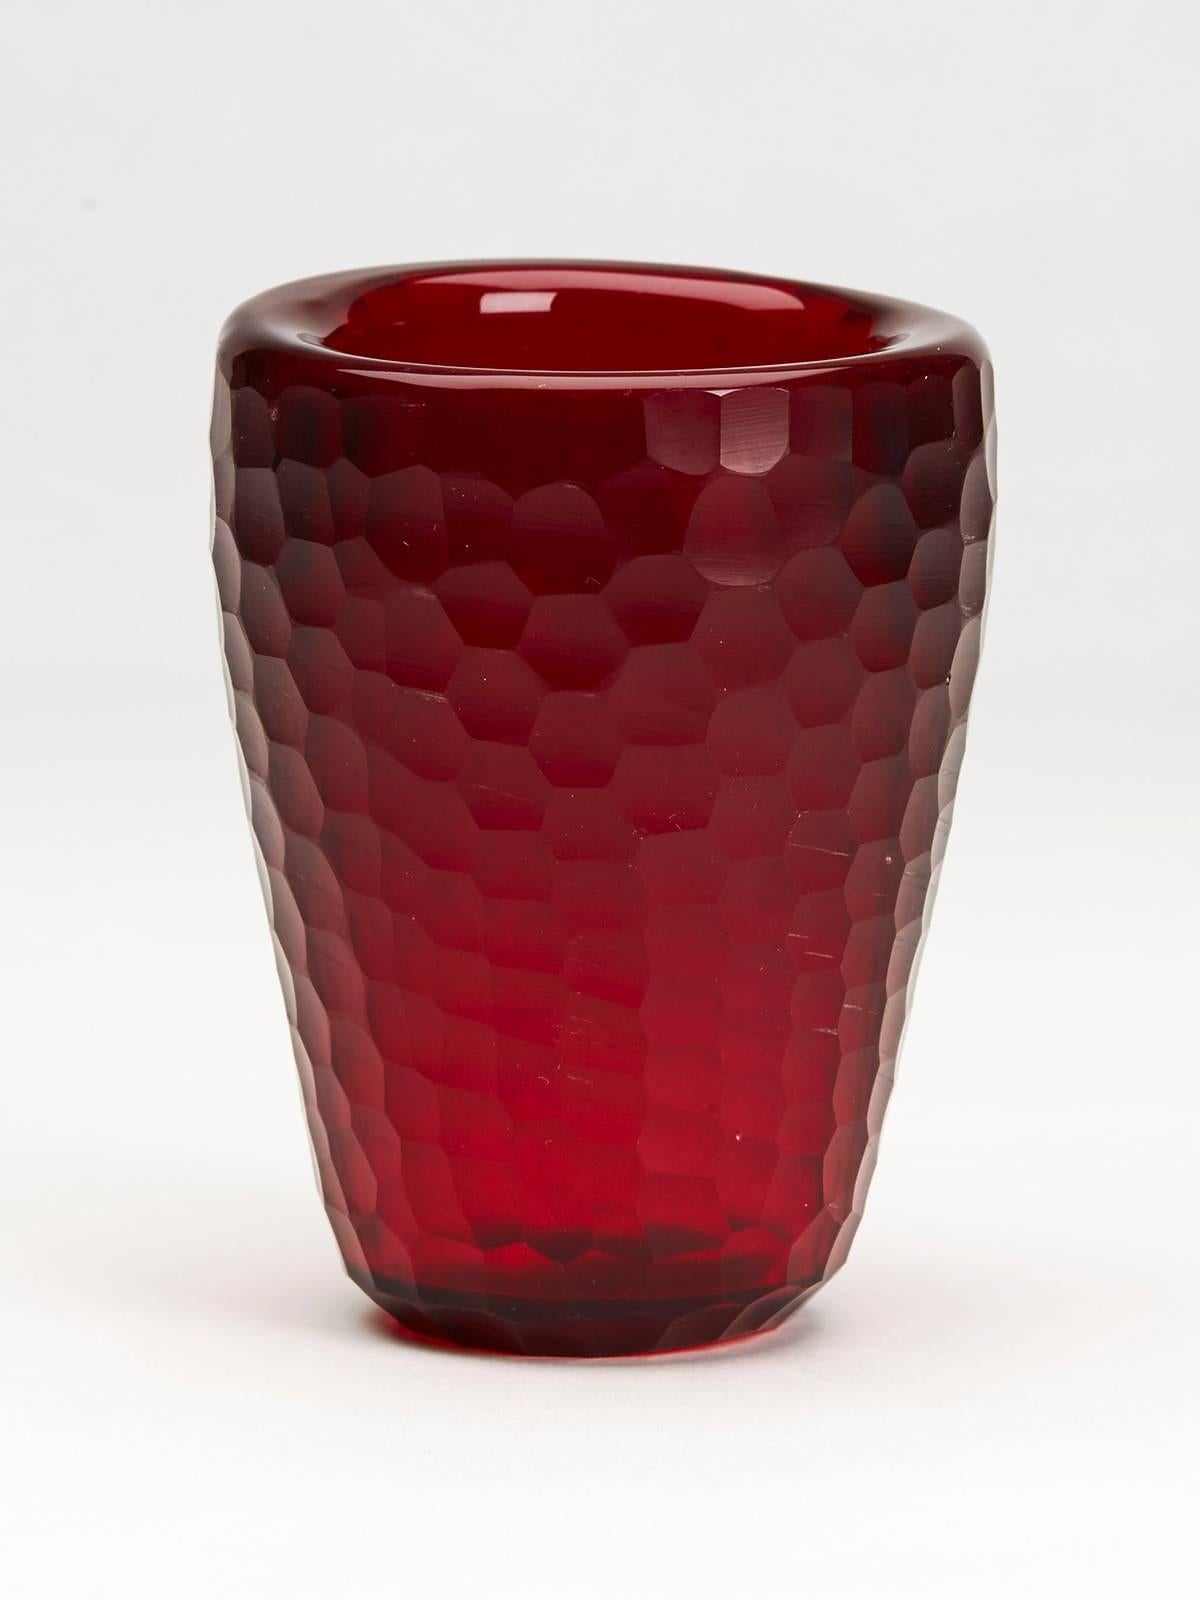 A stunning vintage Italian Murano 'battuto' red art glass vase of small rounded cylindrical shape with a thick glass body with honeycomb cut design attributed to Carlo Scarpa for Venini. The vase has a flat polished base and was acquired as part of